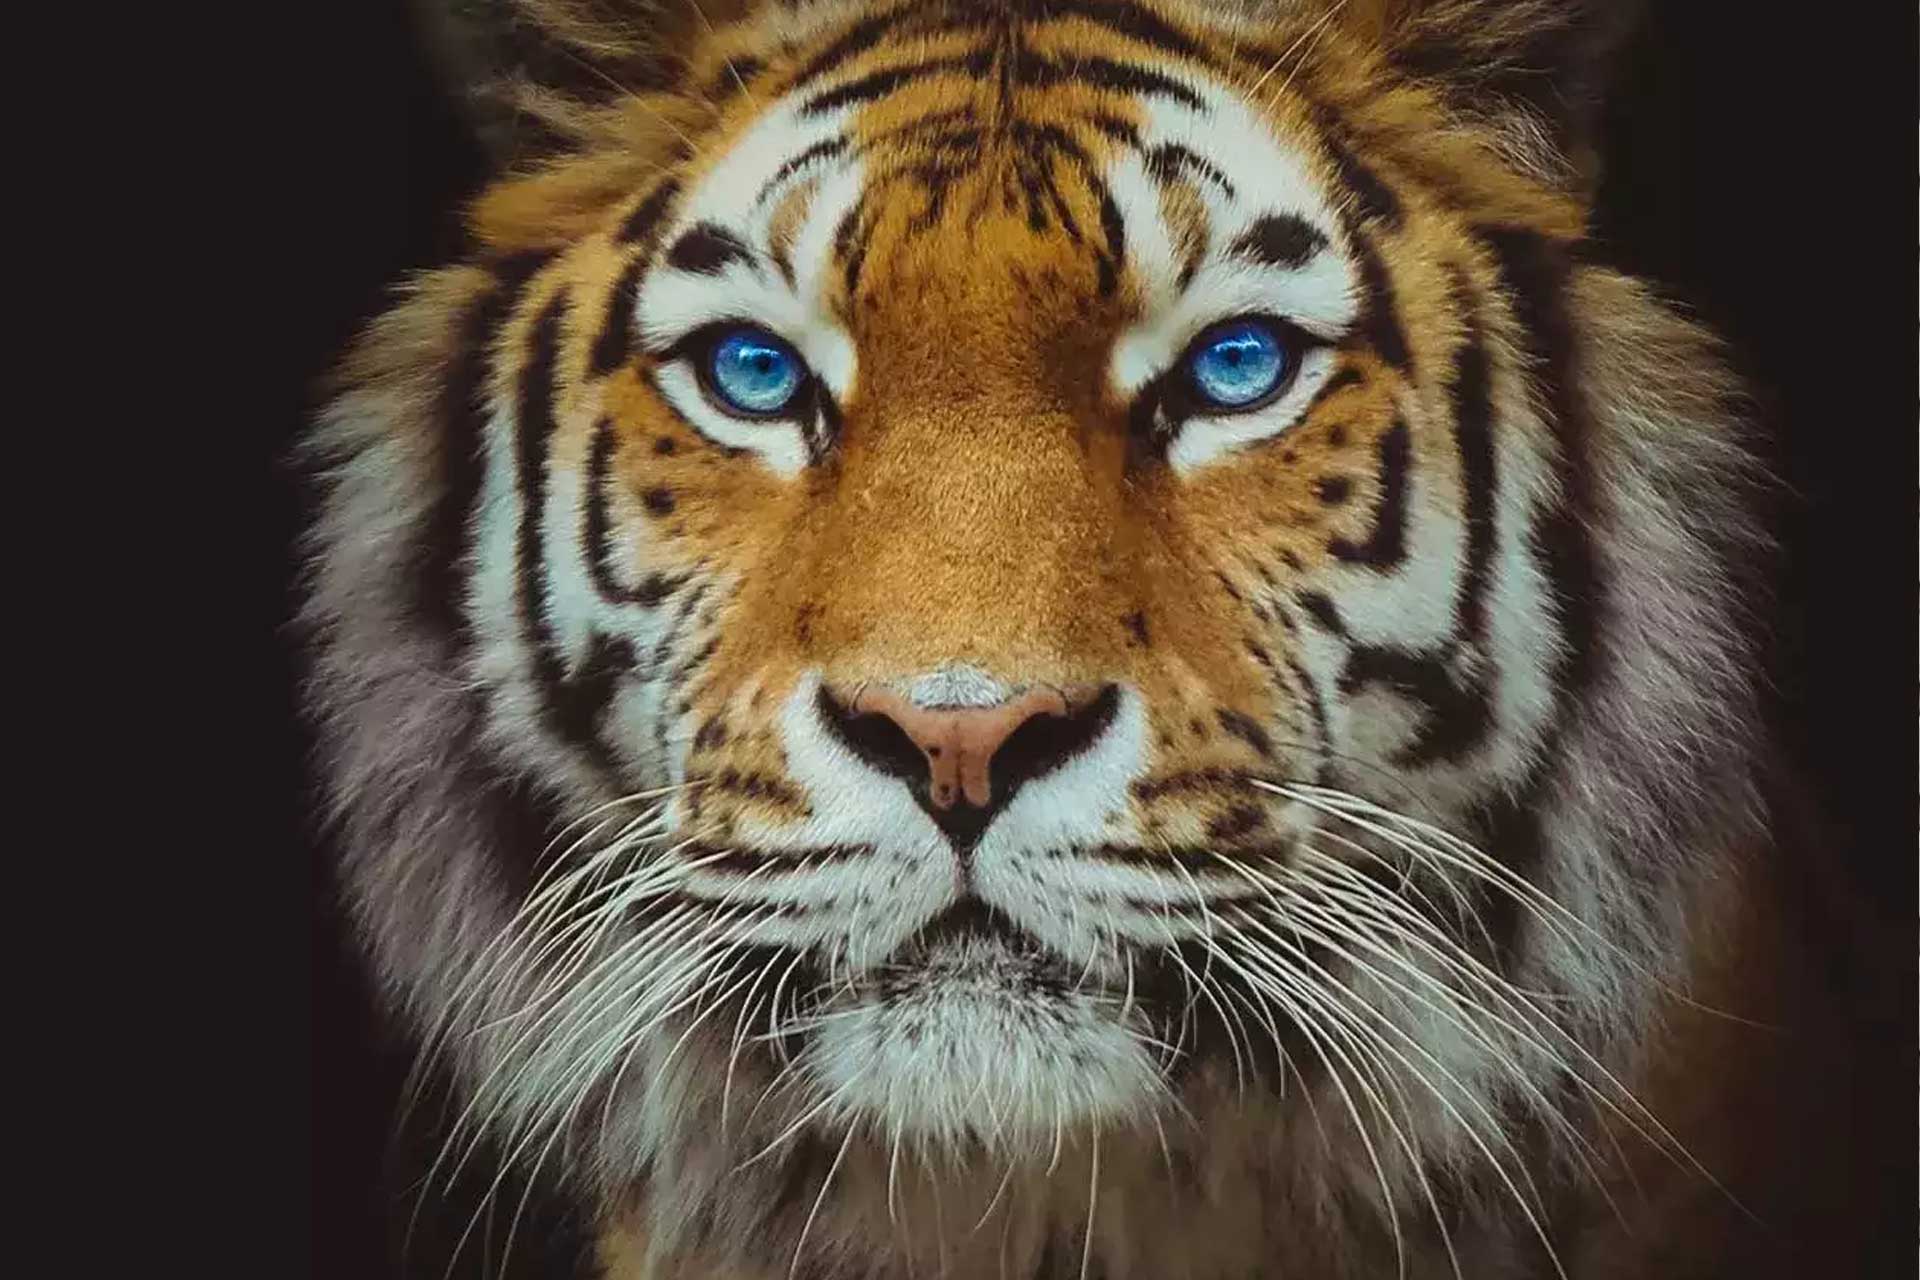 A tiger symbolizes deritrade - our issuance platform for structured products